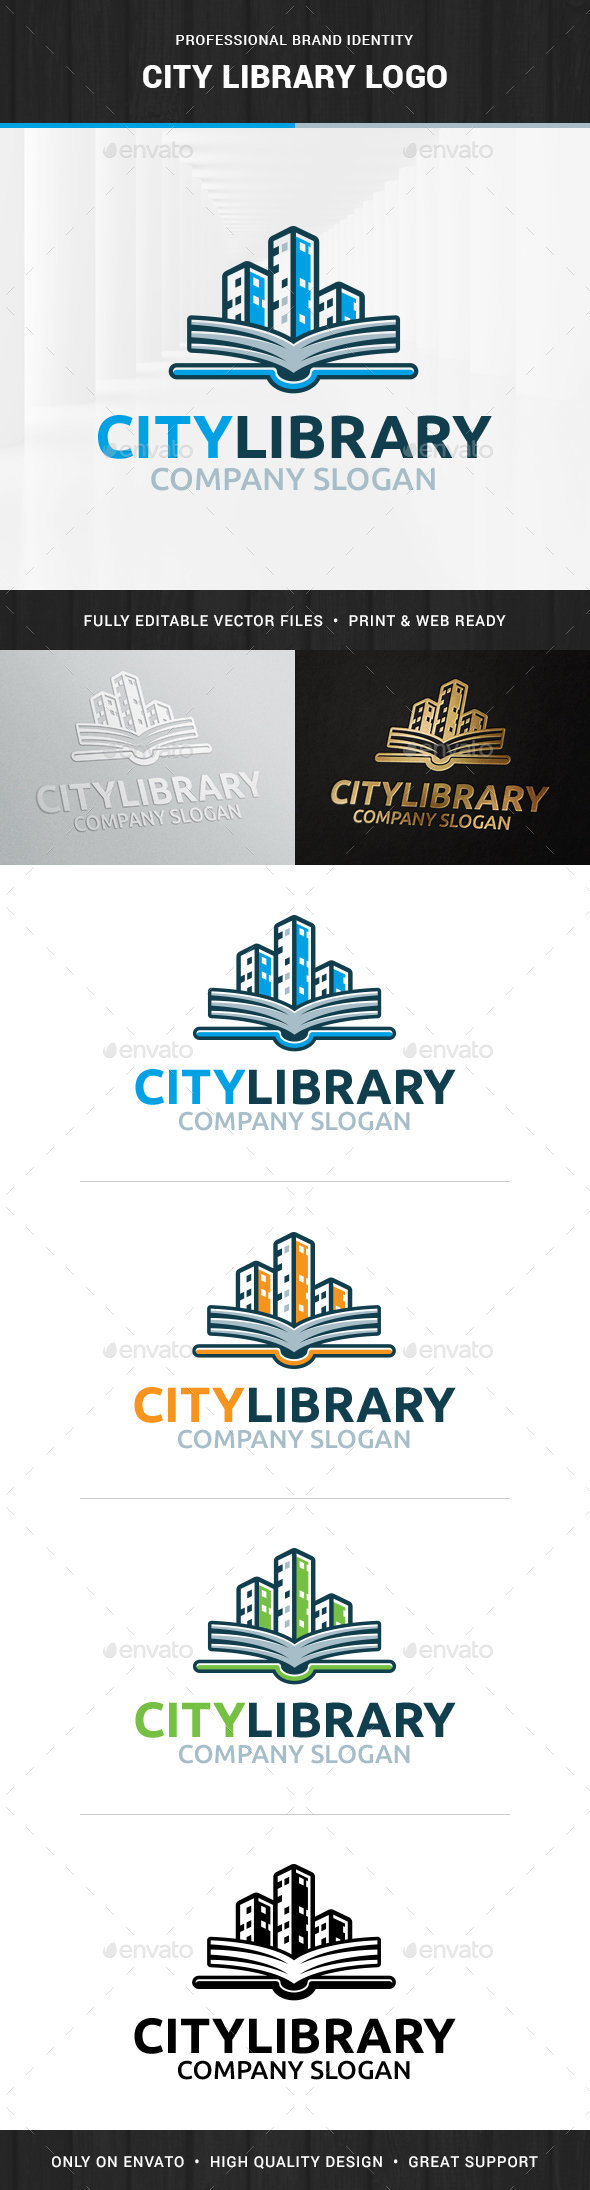 City Library Logo Template